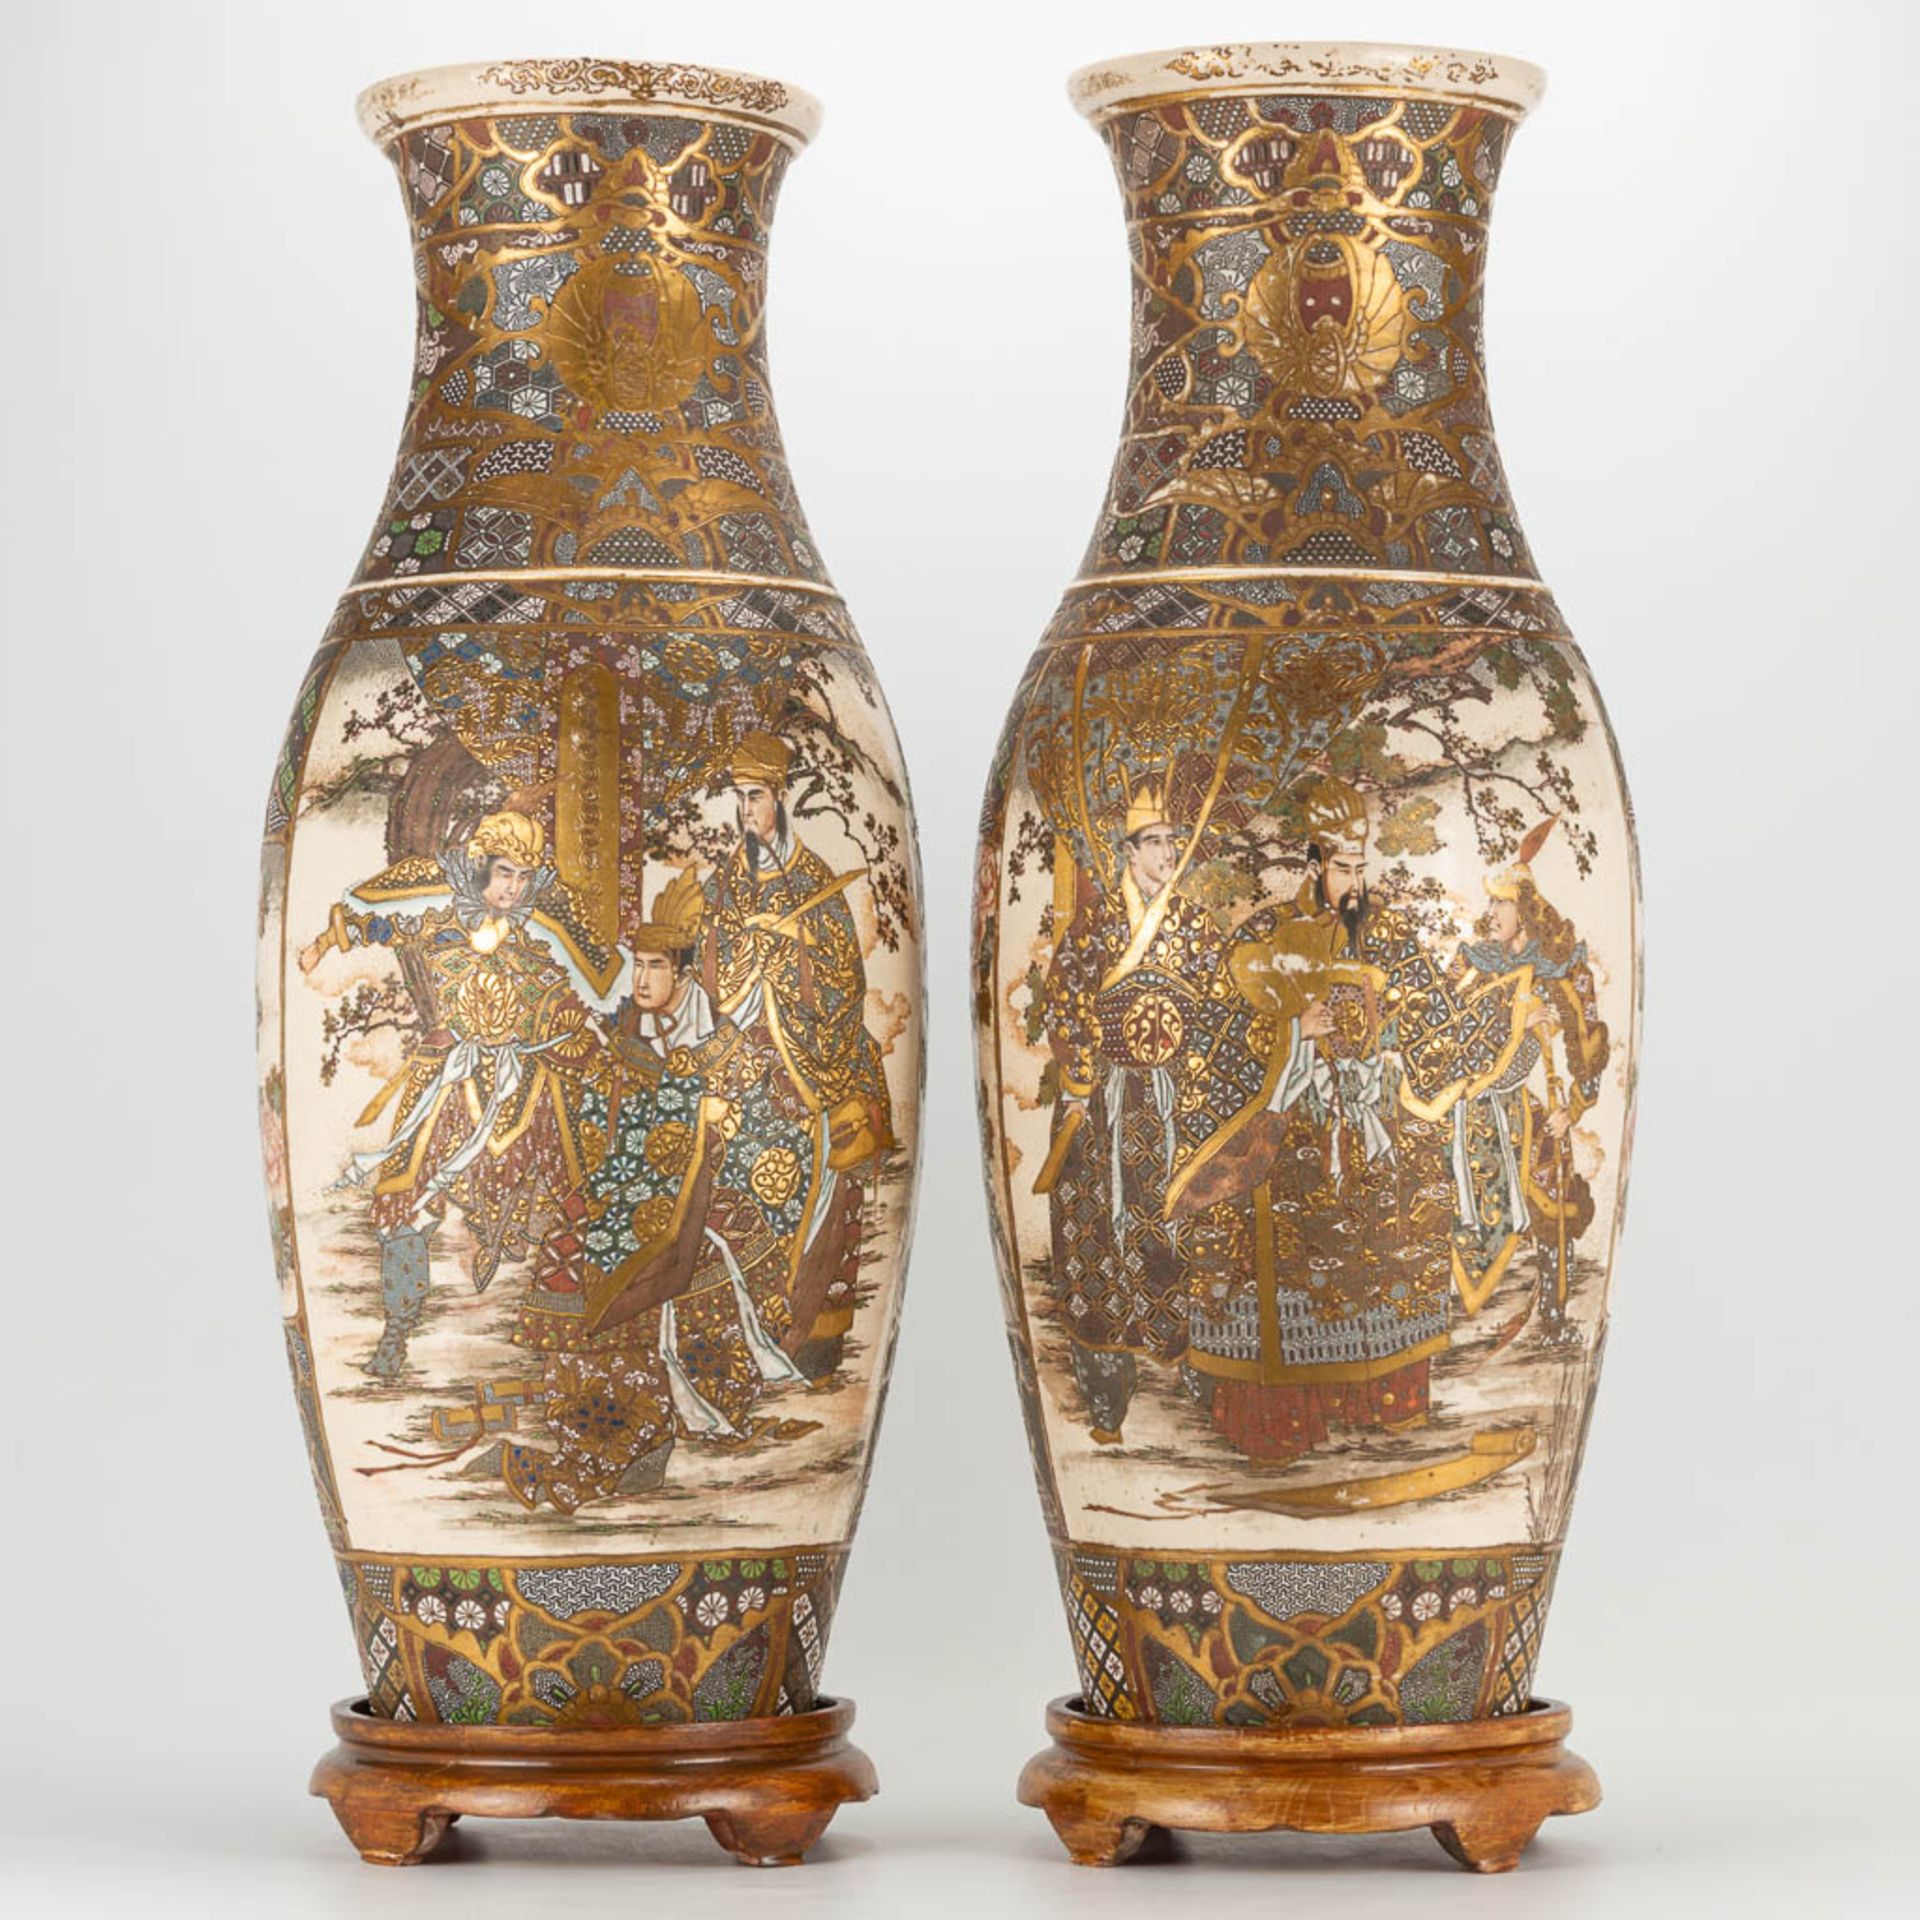 A pair of Japanese Satsuma vases with decor of warriors standing on a wood base. 19th/20th century. - Image 6 of 22